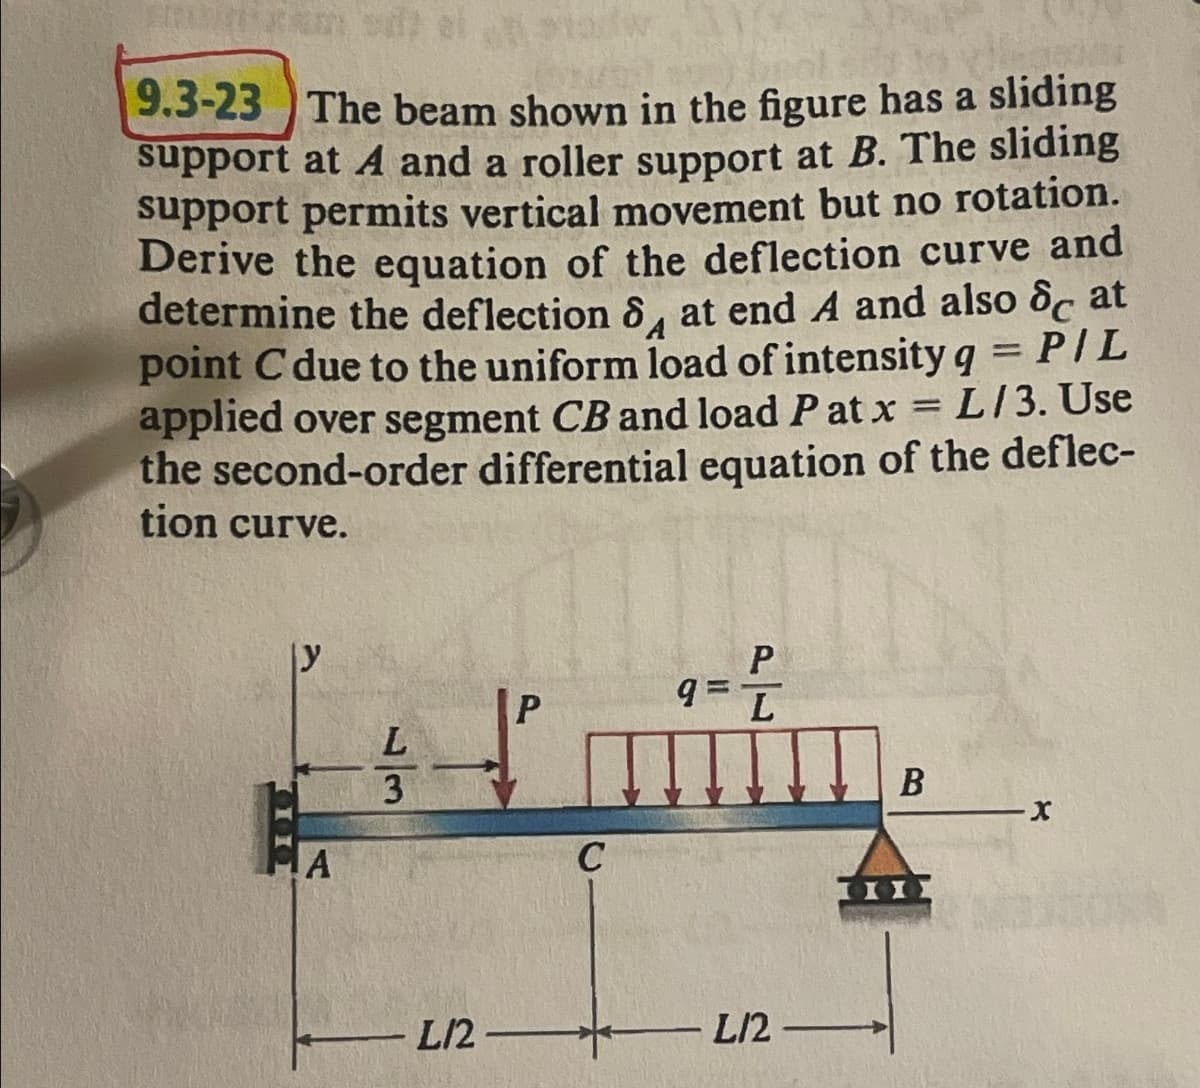 9.3-23 The beam shown in the figure has a sliding
support at A and a roller support at B. The sliding
support permits vertical movement but no rotation.
Derive the equation of the deflection curve and
determine the deflection 8 at end A and also c at
point C due to the uniform load of intensity q = P/L
L/3. Use
applied over segment CB and load Patx
the second-order differential equation of the deflec-
tion curve.
y
A
L
3
L/2
P
C
q=
P
L
L12
1
B
X